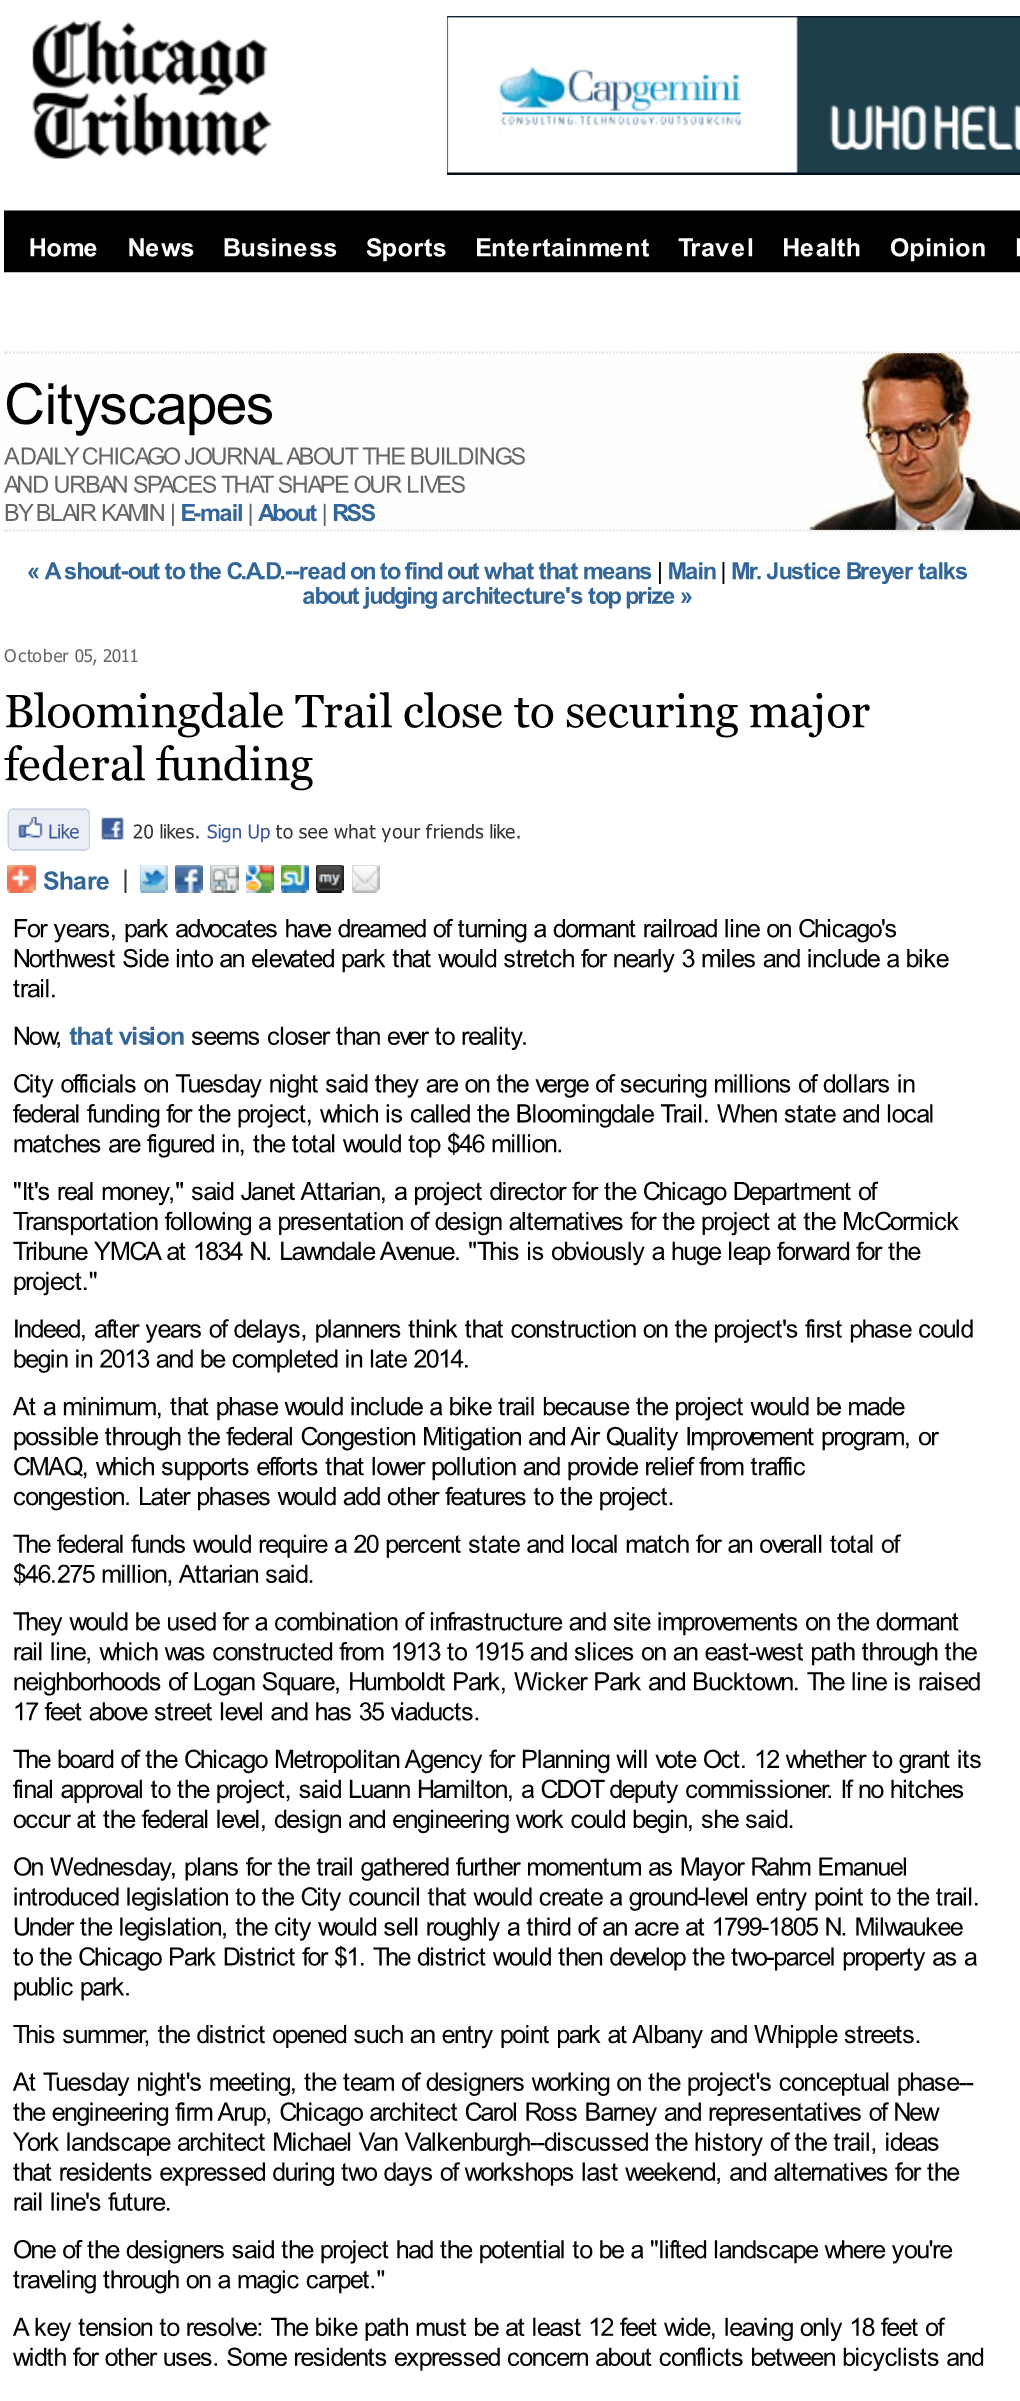 Cityscapes: Bloomingdale Trail Close to Securing Major Federal Funding